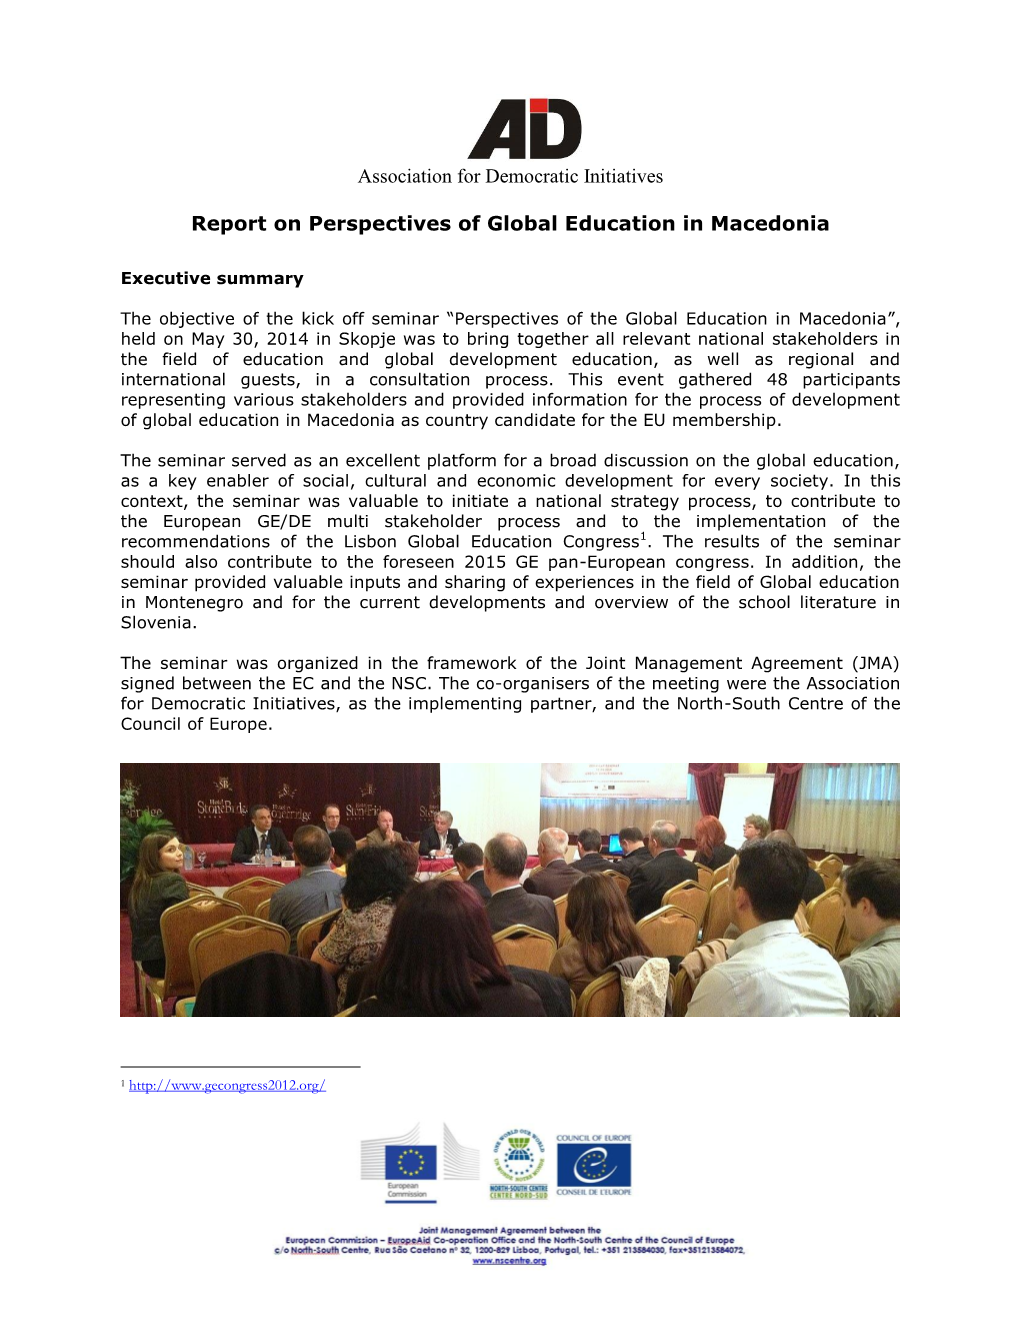 Association for Democratic Initiatives Report on Perspectives of Global